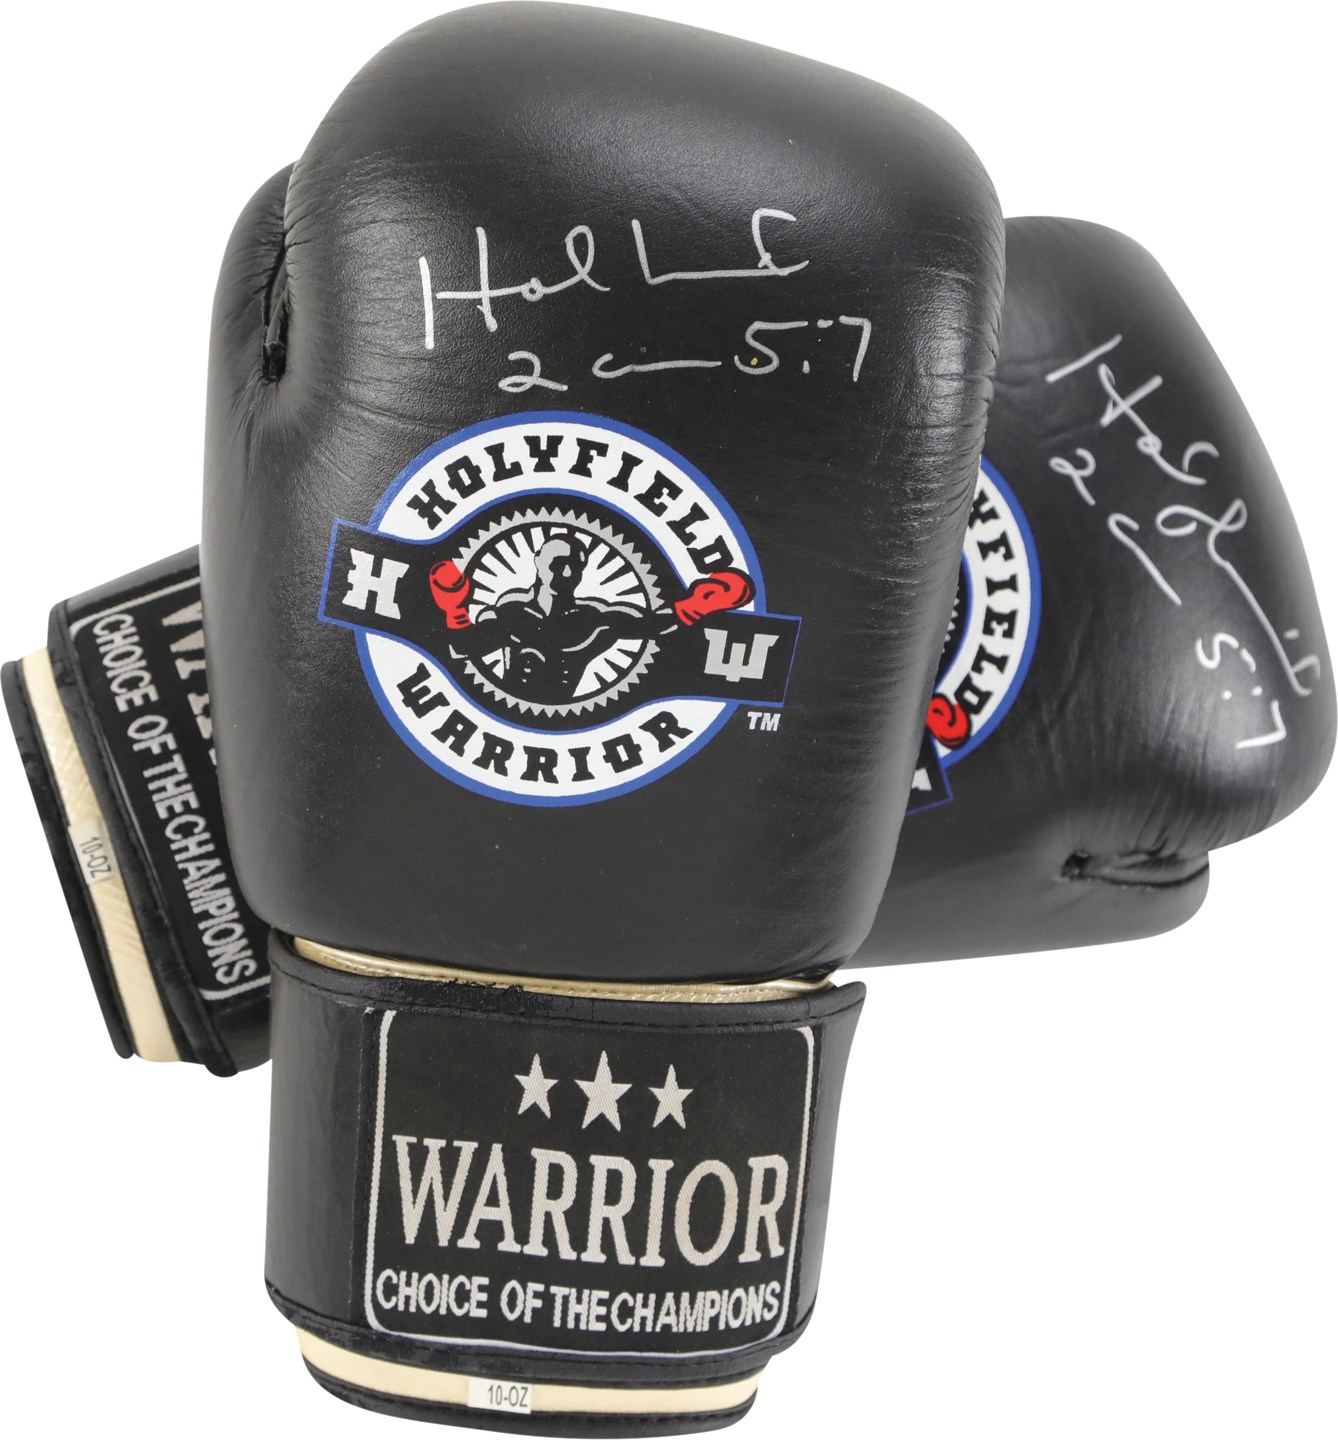 Evander Holyfield Signed Worn Gloves from Home Gym